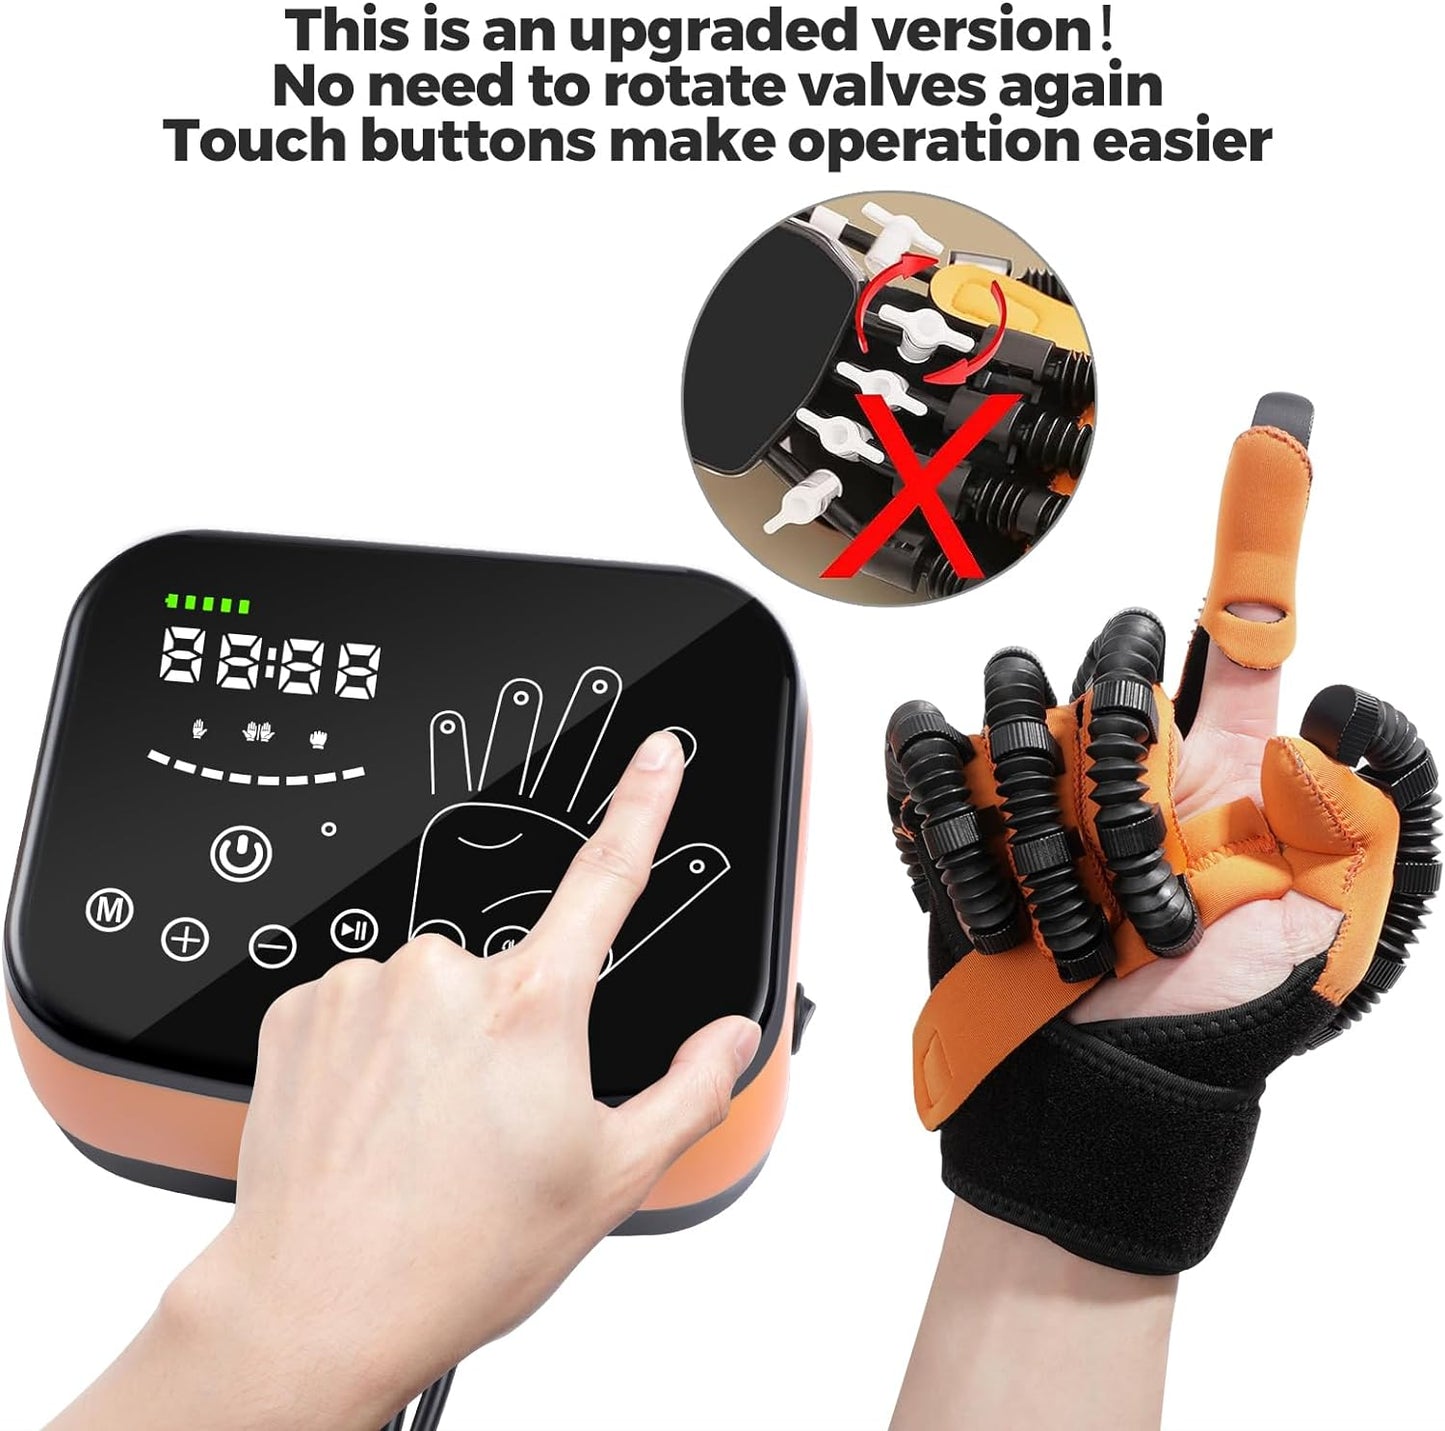 Creliver Improved Version Upgraded Stroke Recovery Equipment Hand Paralysis Rehabilitation Finger Rehab Robotic Gloves for Stiffness Paralyzed Hand Training at Home(Left Hand-L)